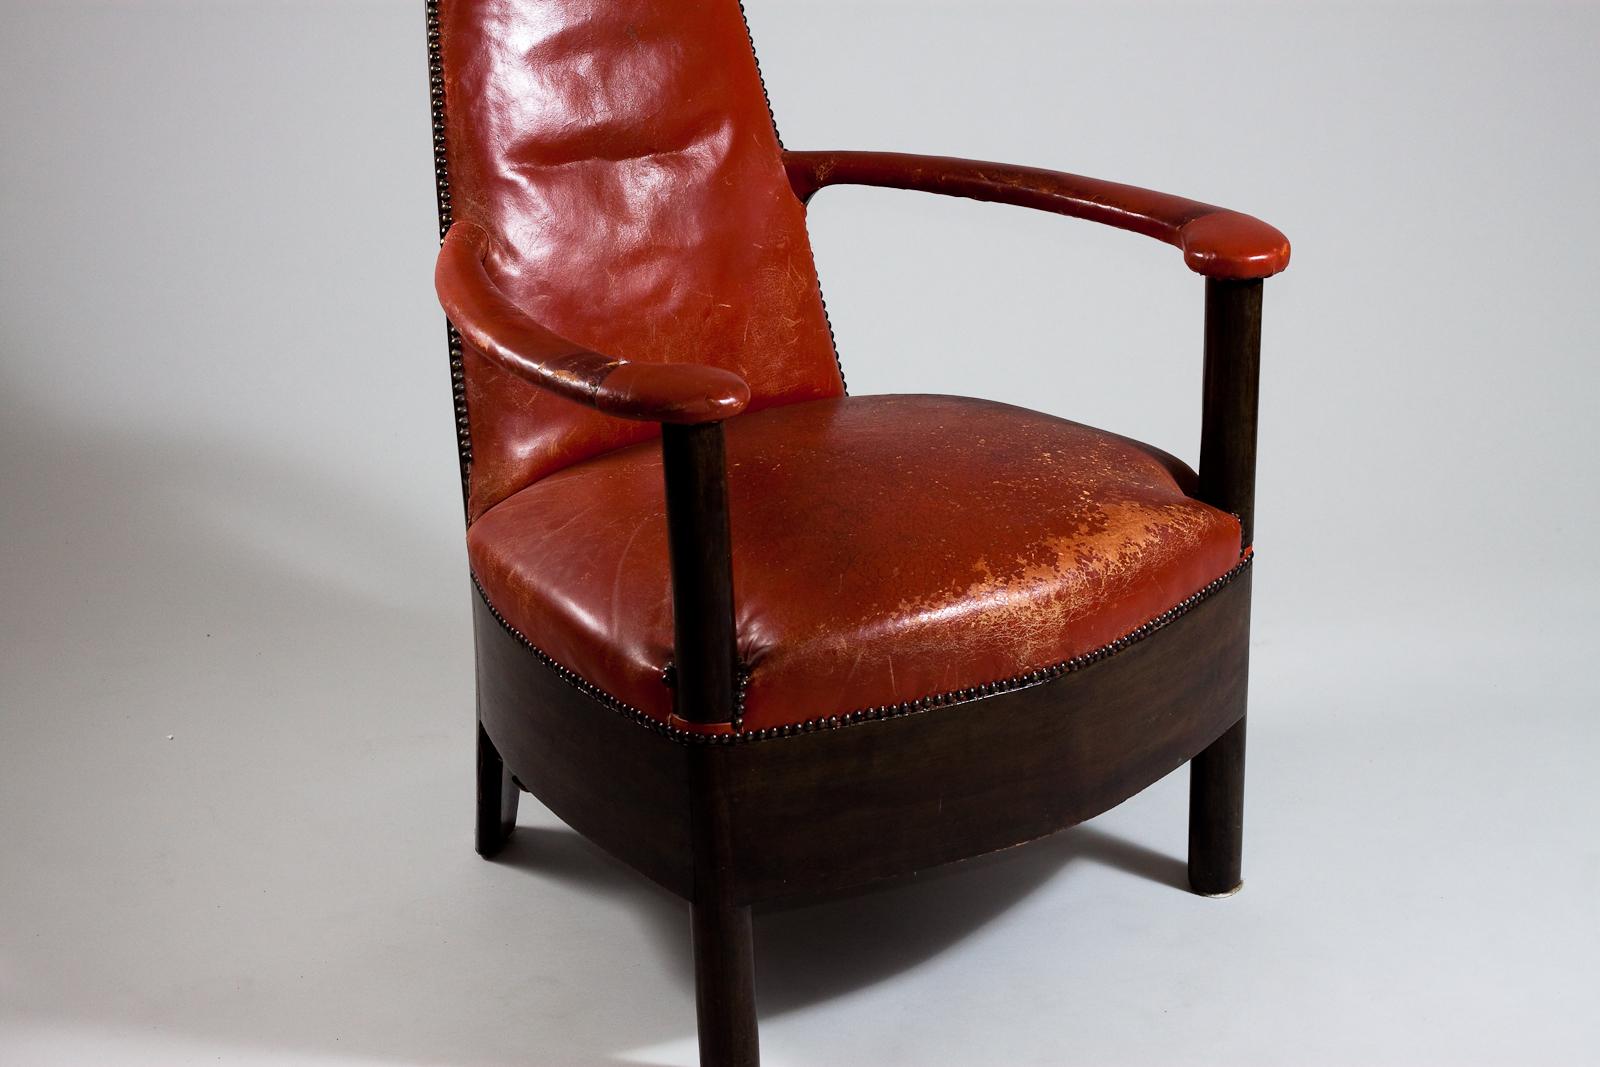 This one-of-a-kind Finnish jugend tall armchair is a timeless piece of furniture, boasting beautiful craftsmanship and an impressive design. Upholstered in luxurious red leather, it is sure to make a statement in any room. The tall back and armrests